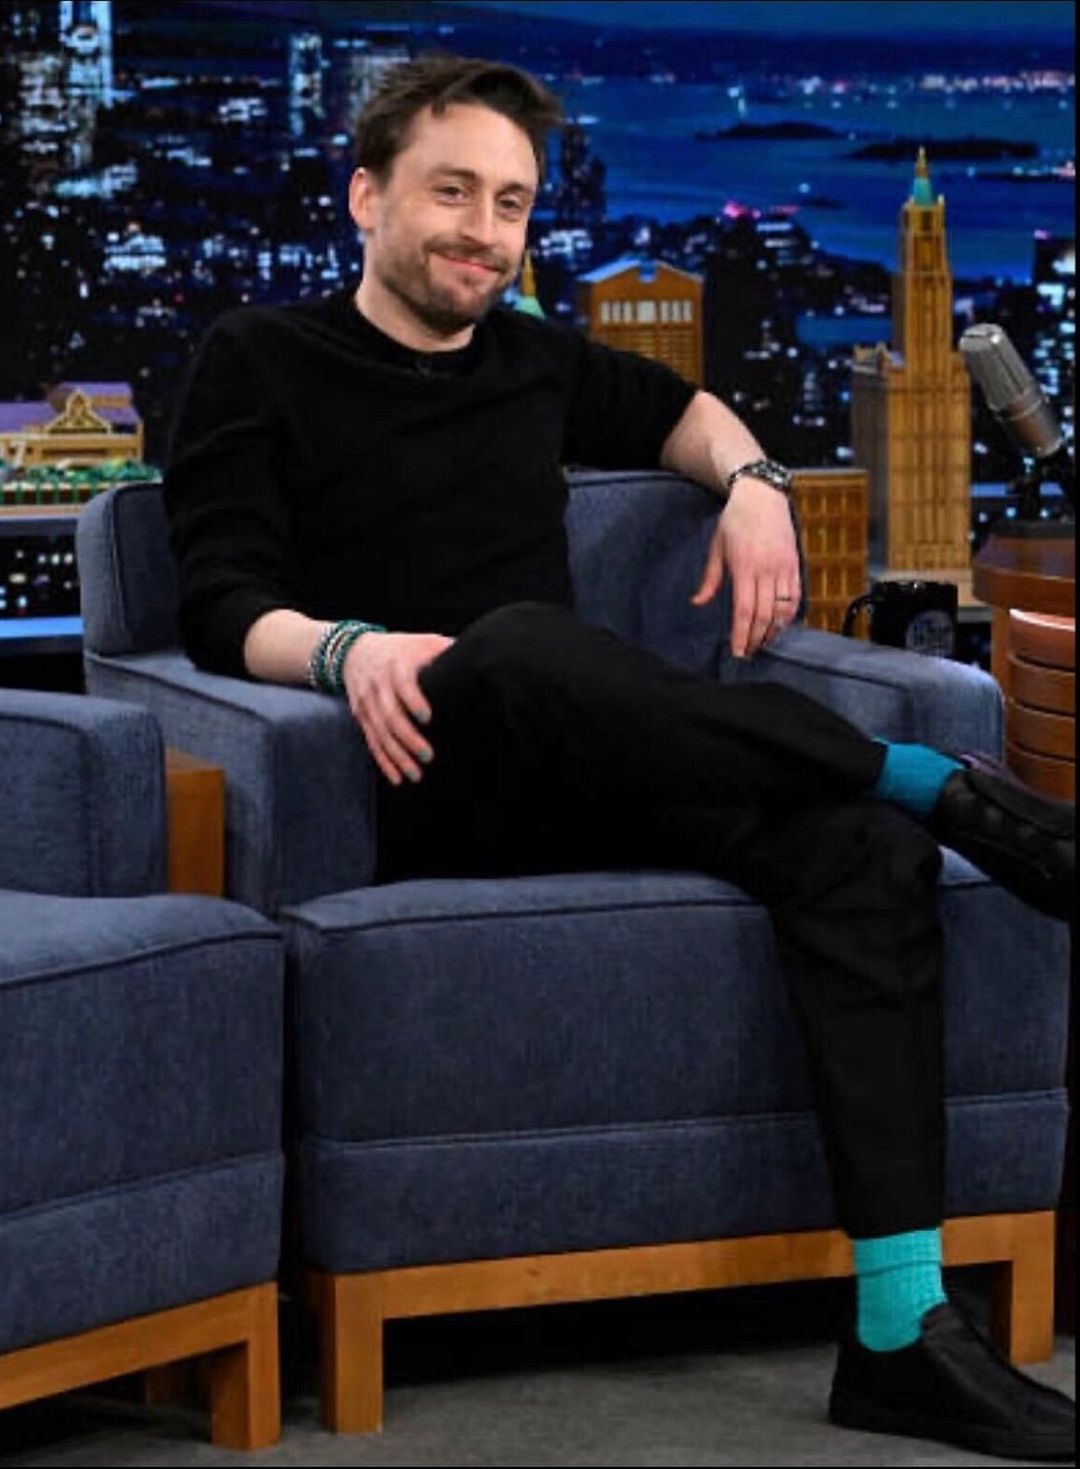 Kieran Culkin on the Tonight Show with Jimmy Fallon wearing a black tshirt and black jeans, with mismatched socks in two different shades of turquoise by London Sock Company.